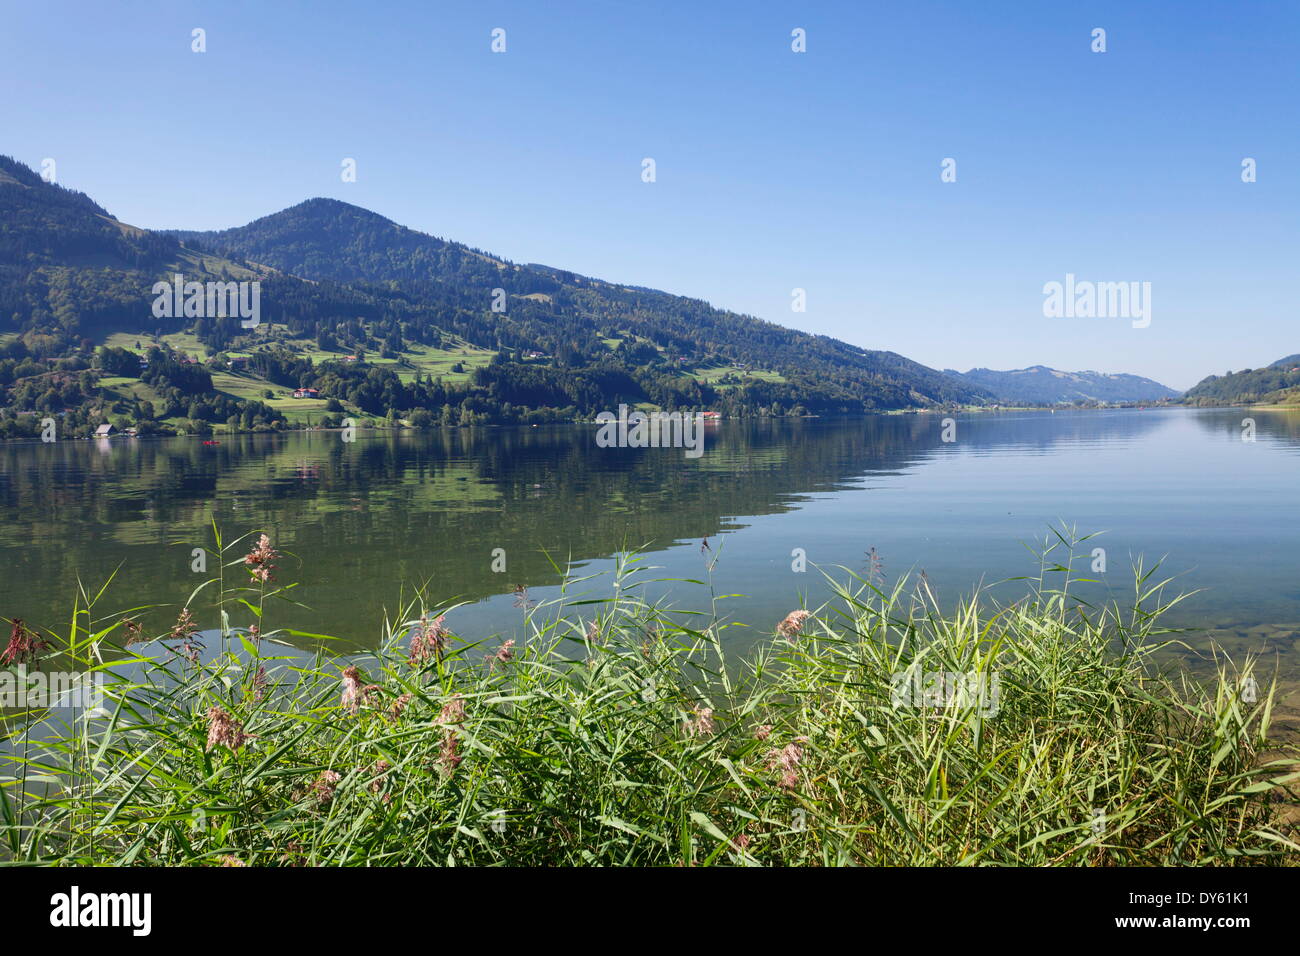 Lac Alpsee, Immenstadt, Allgau, Bavaria, Germany, Europe Banque D'Images